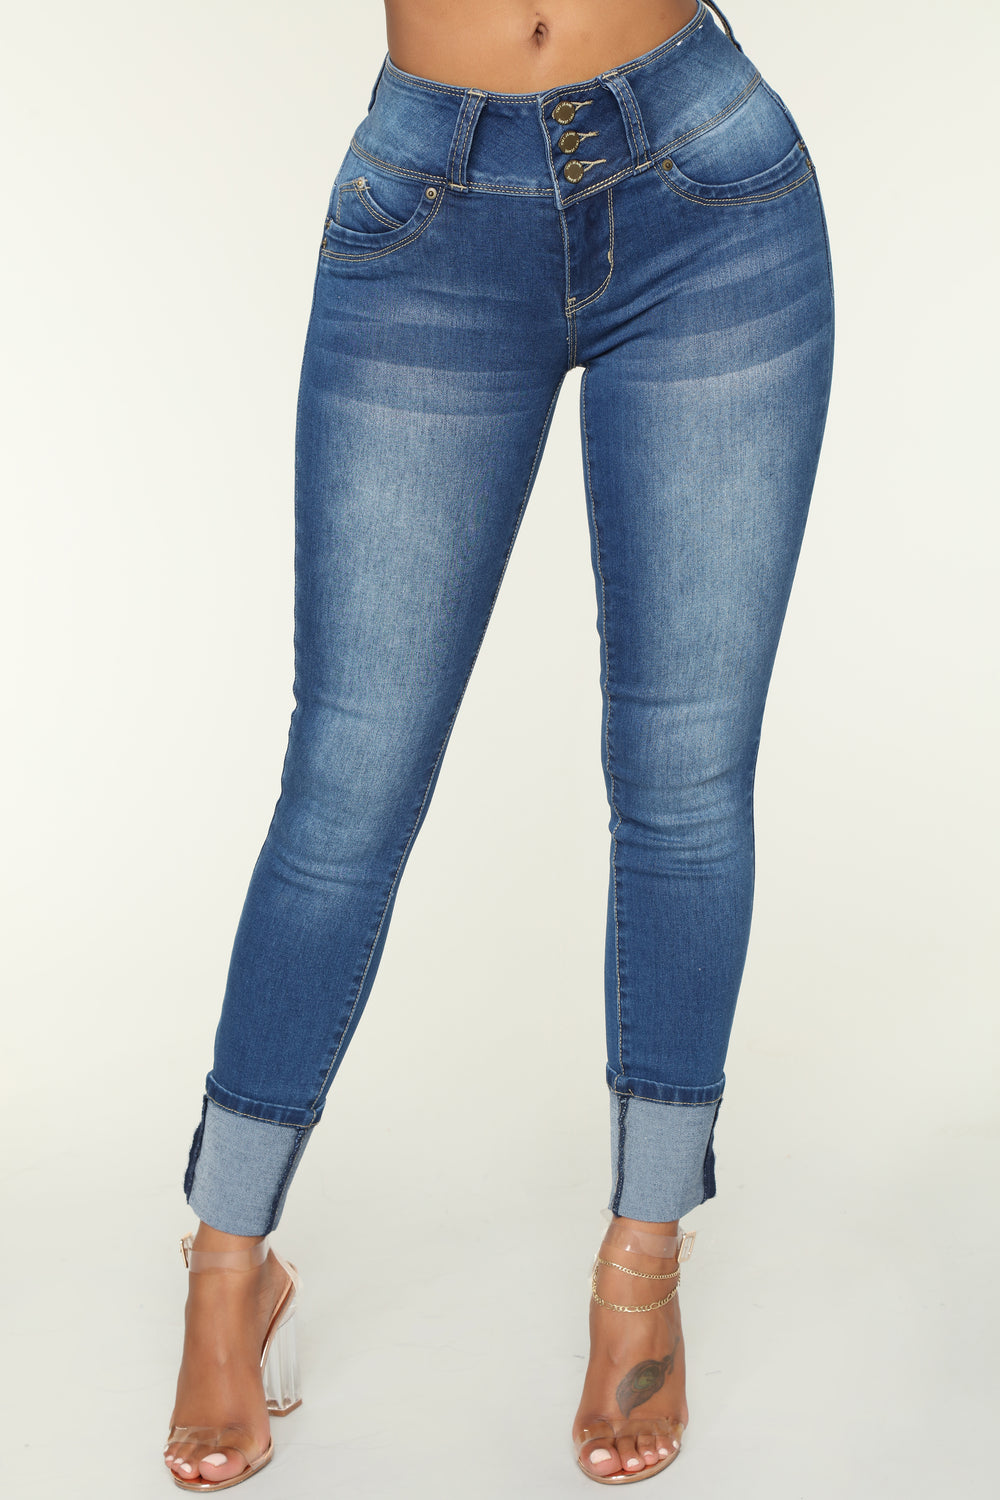 Nice To Know Me Booty Lifting Jeans - Medium